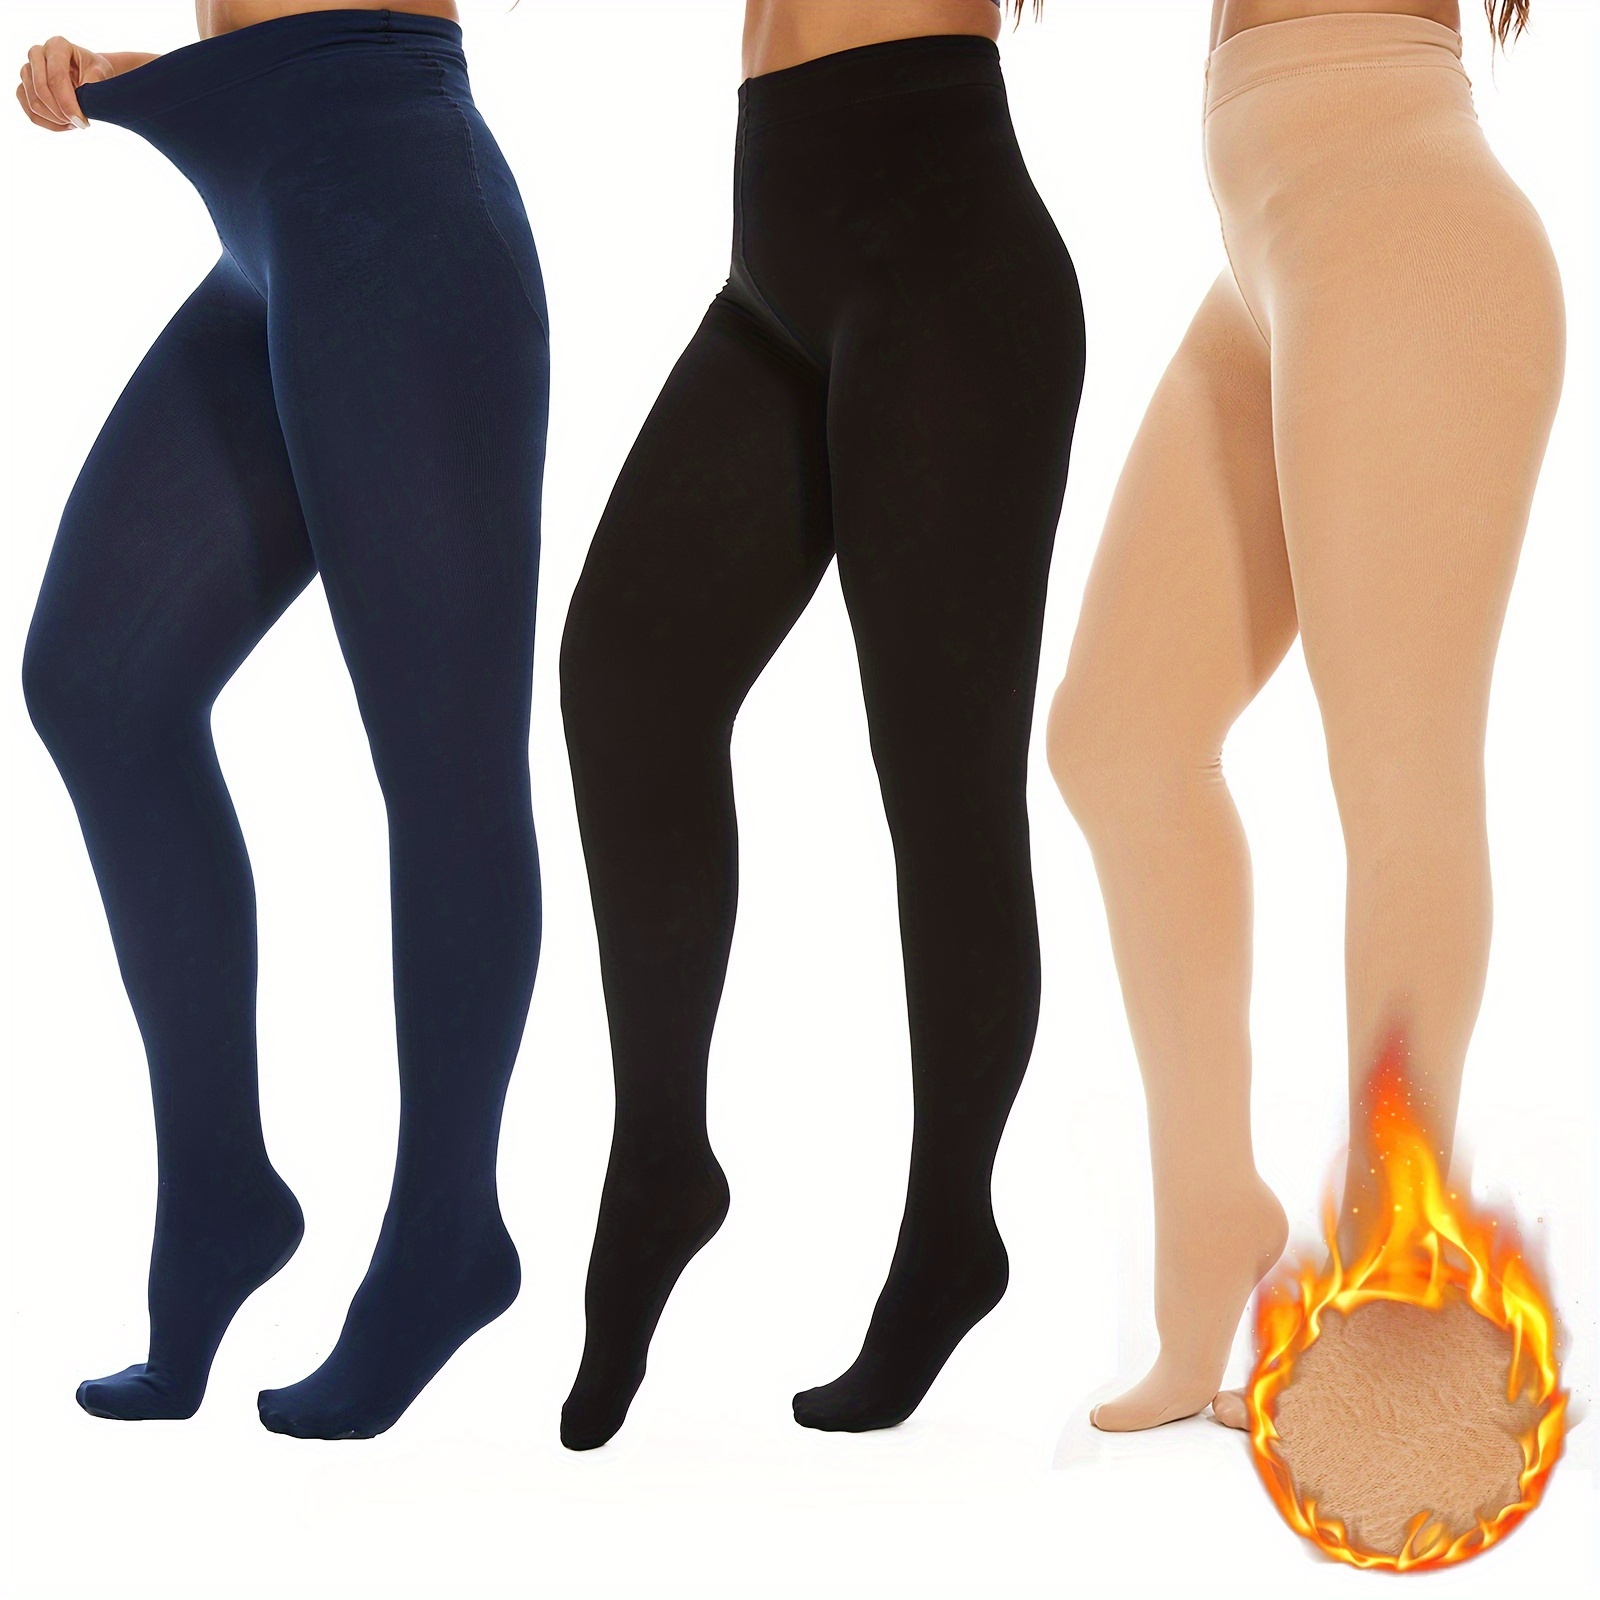 Plus Size Fleece Lined Tights,Winter Warm Fake Translucent Leggings for  Women,Thick Thermal Pants Pantyhose